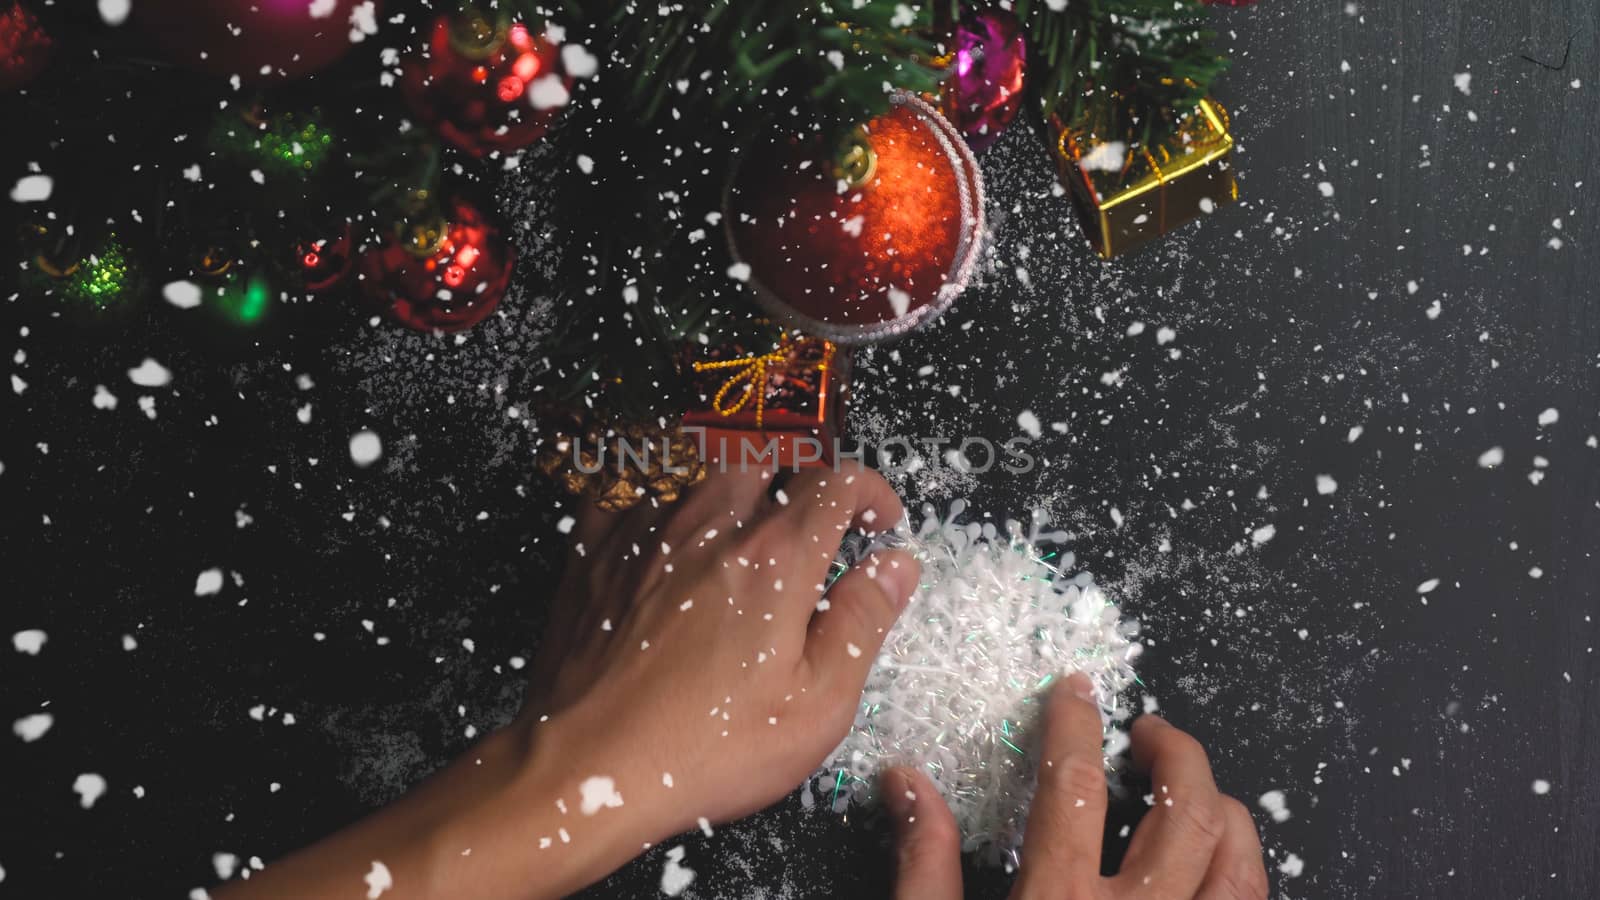 Greeting Season concept.hand setting of ornaments on a Christmas tree with decorative light